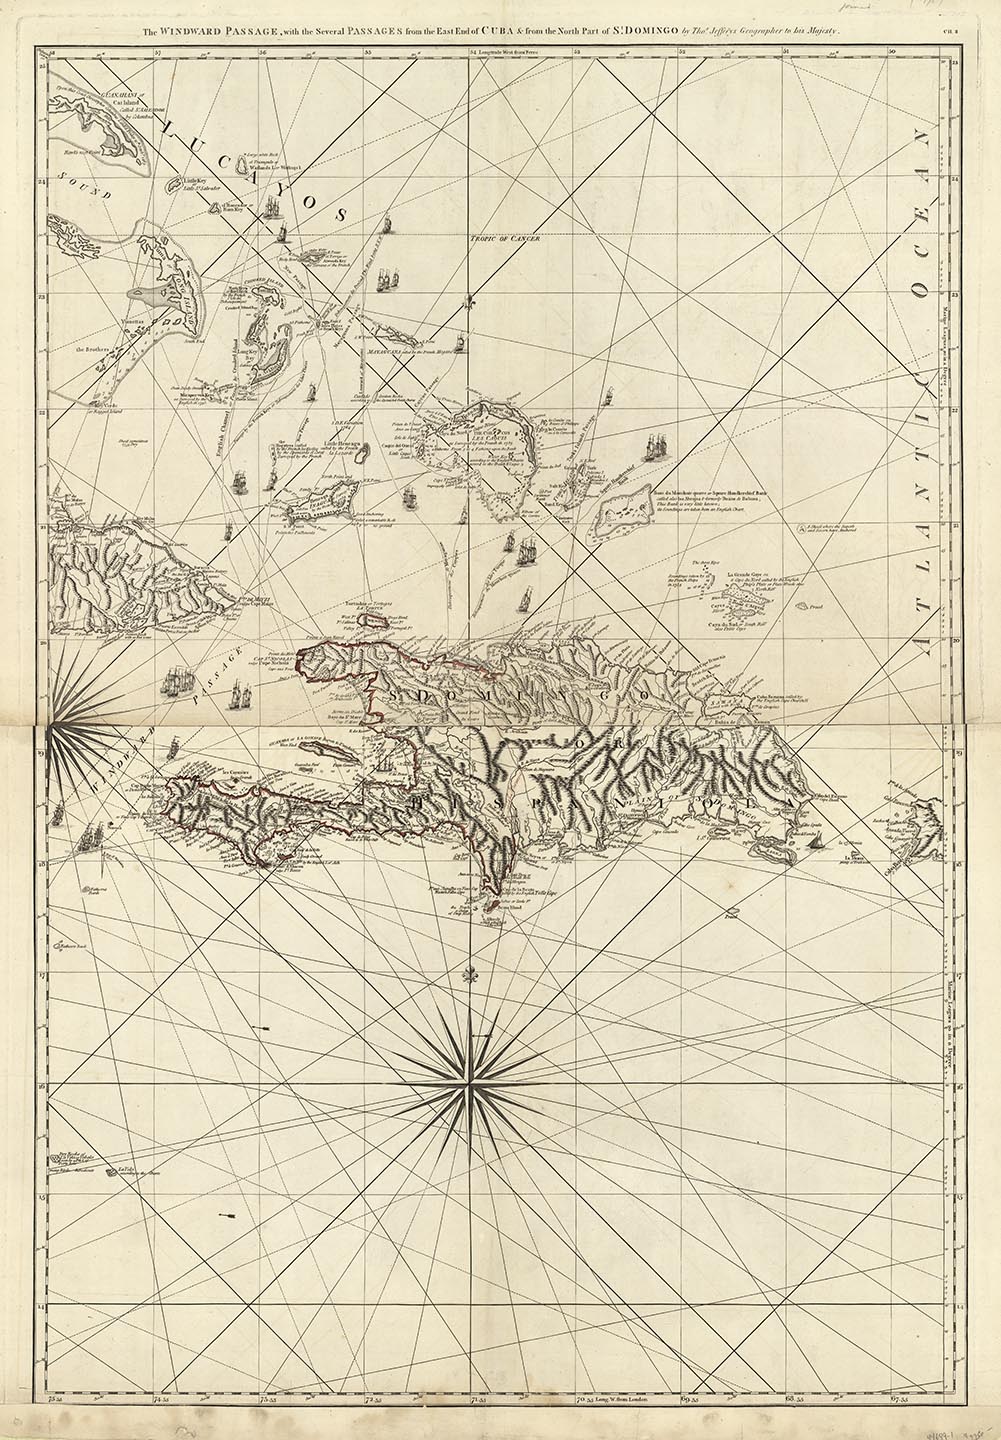 The Windward Passage, with several Passages from the east end of Cuba & from the north part of St. Domingo. (Bahamas, Turks and Caicos).